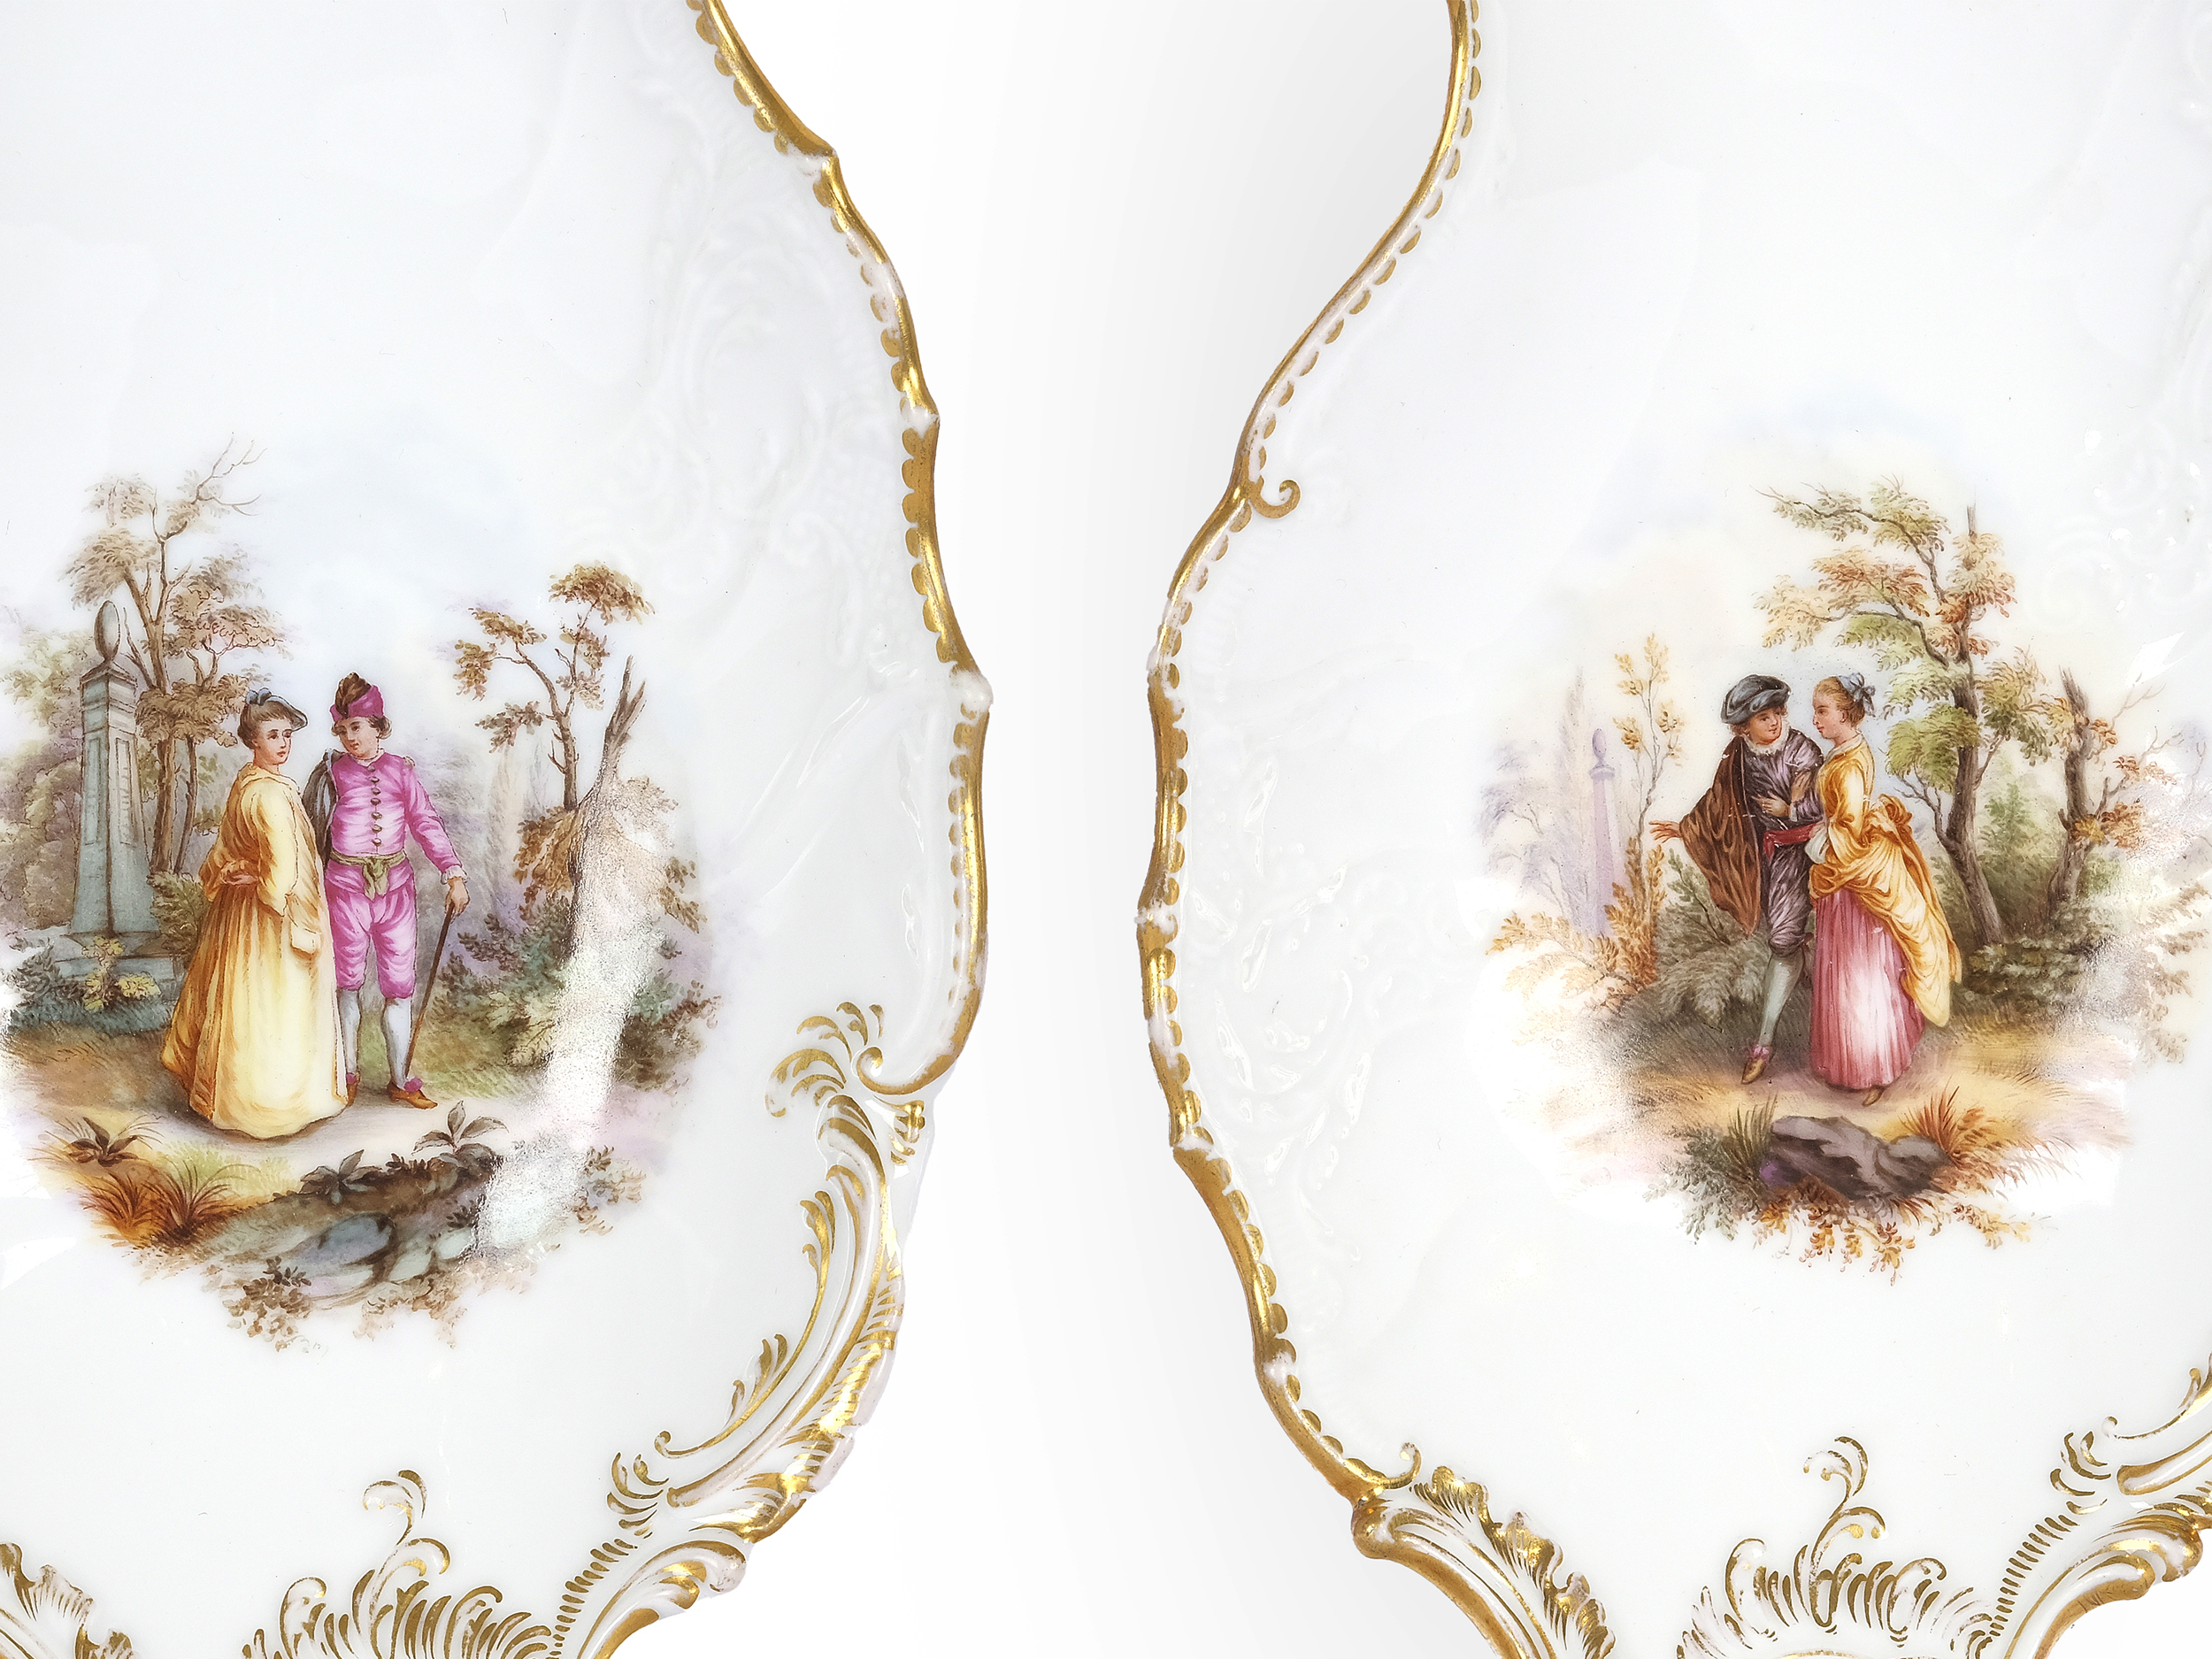 Pair of offering bowls, Schlagenwald, 19th century - Image 3 of 4